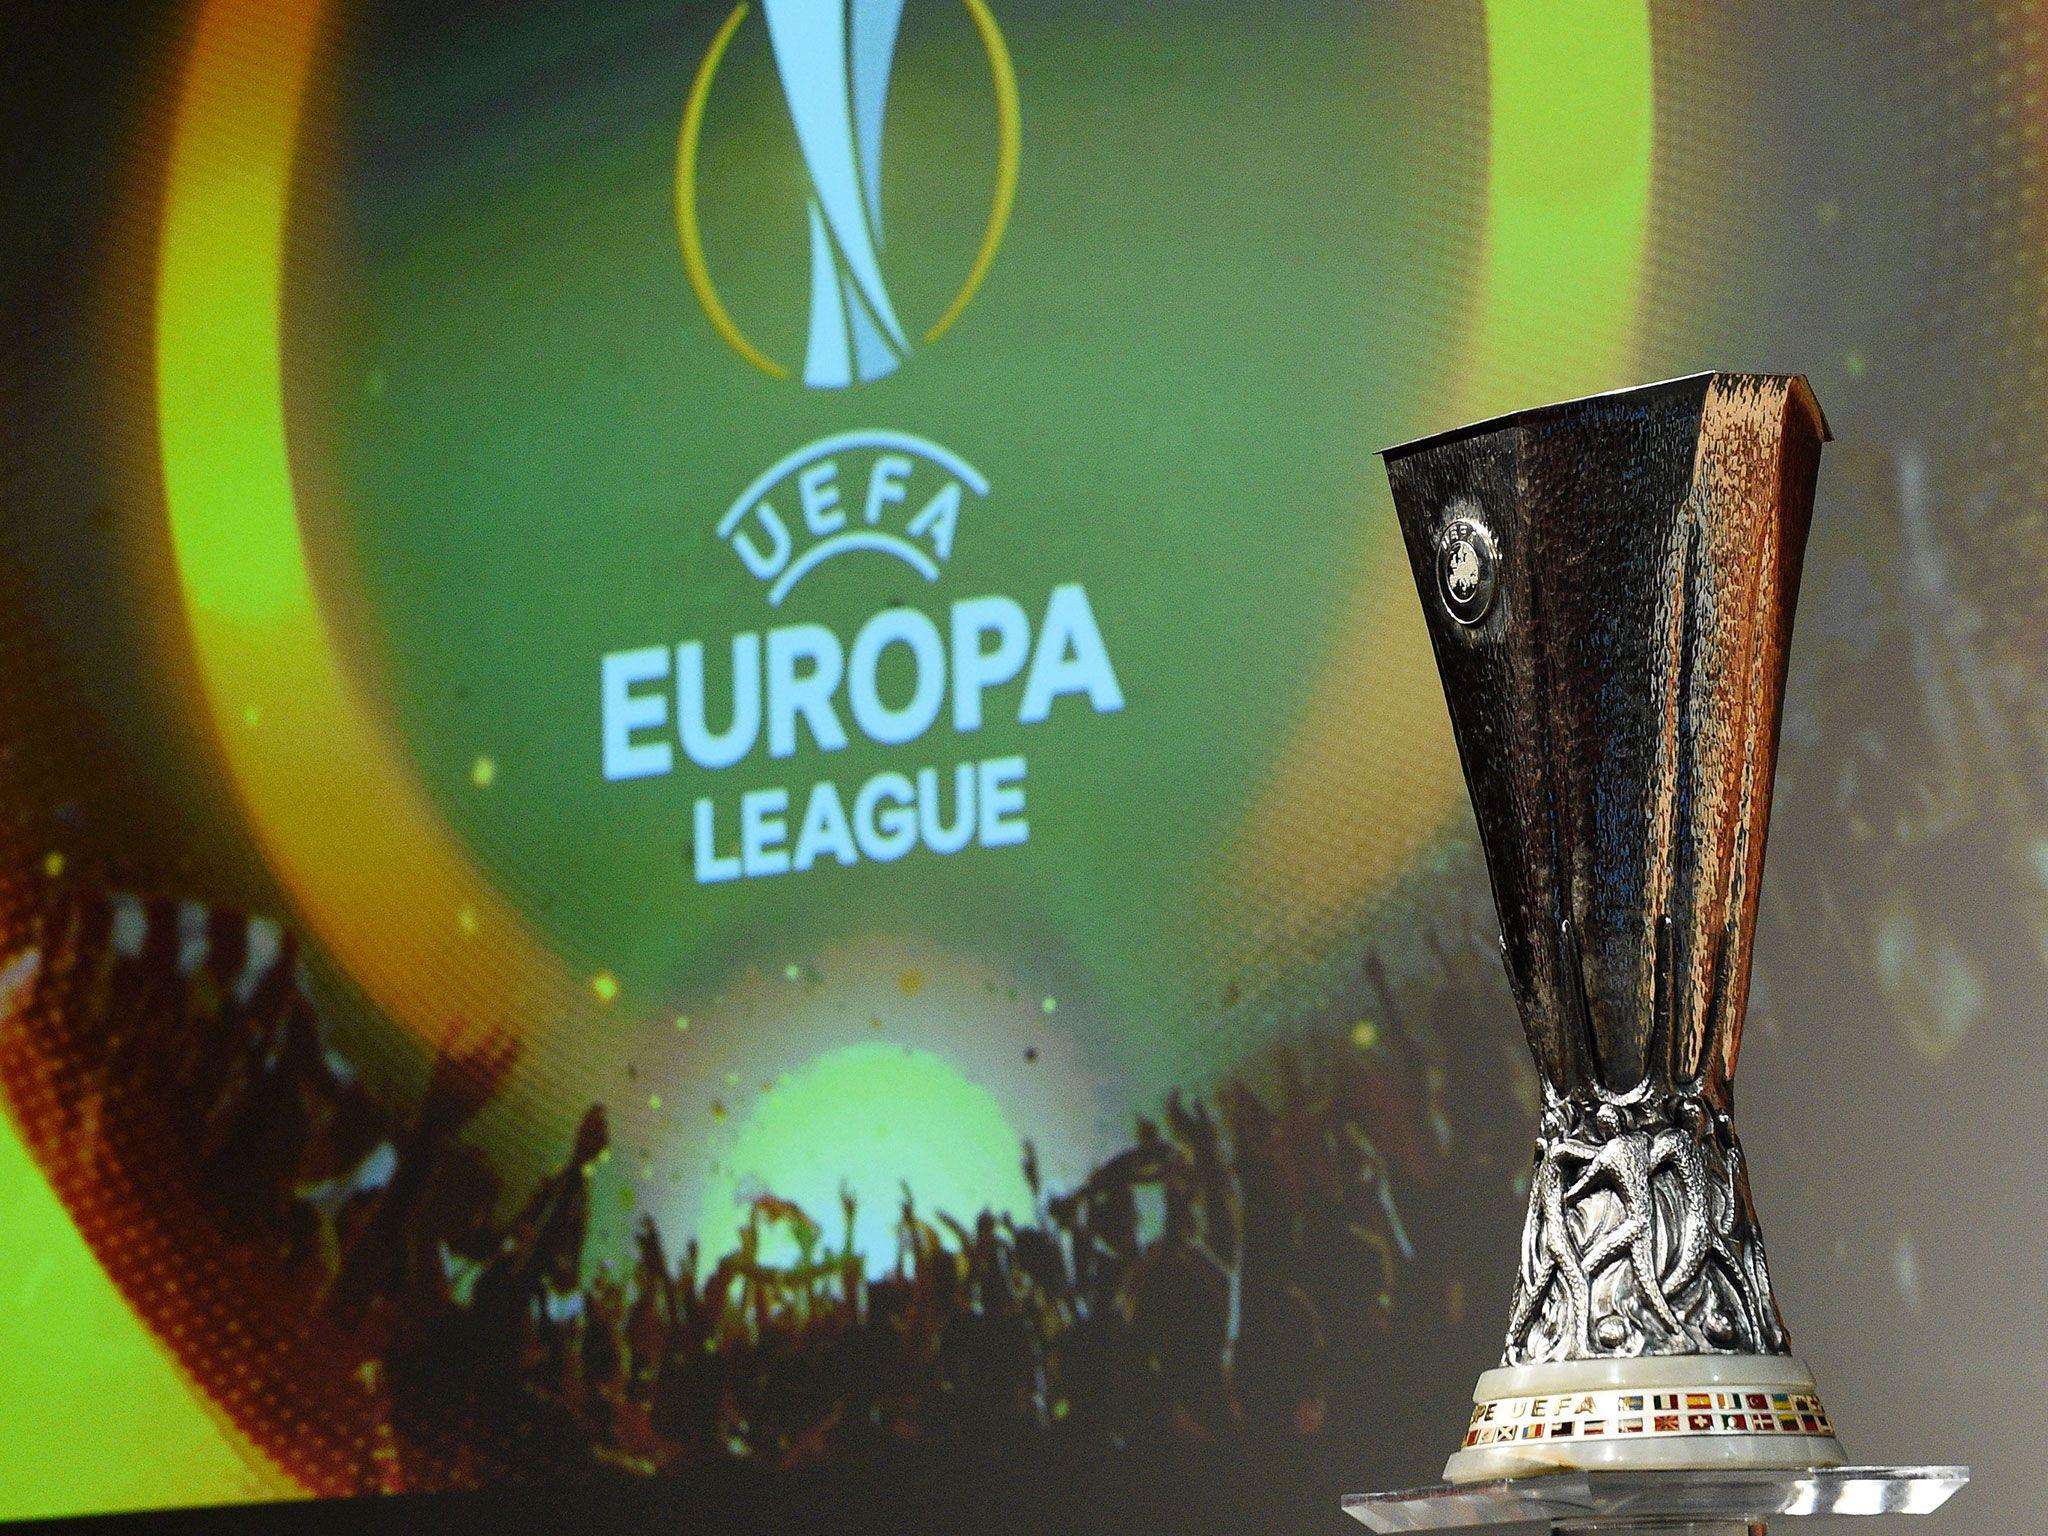 Europa League draw as it happened: Manchester United draw